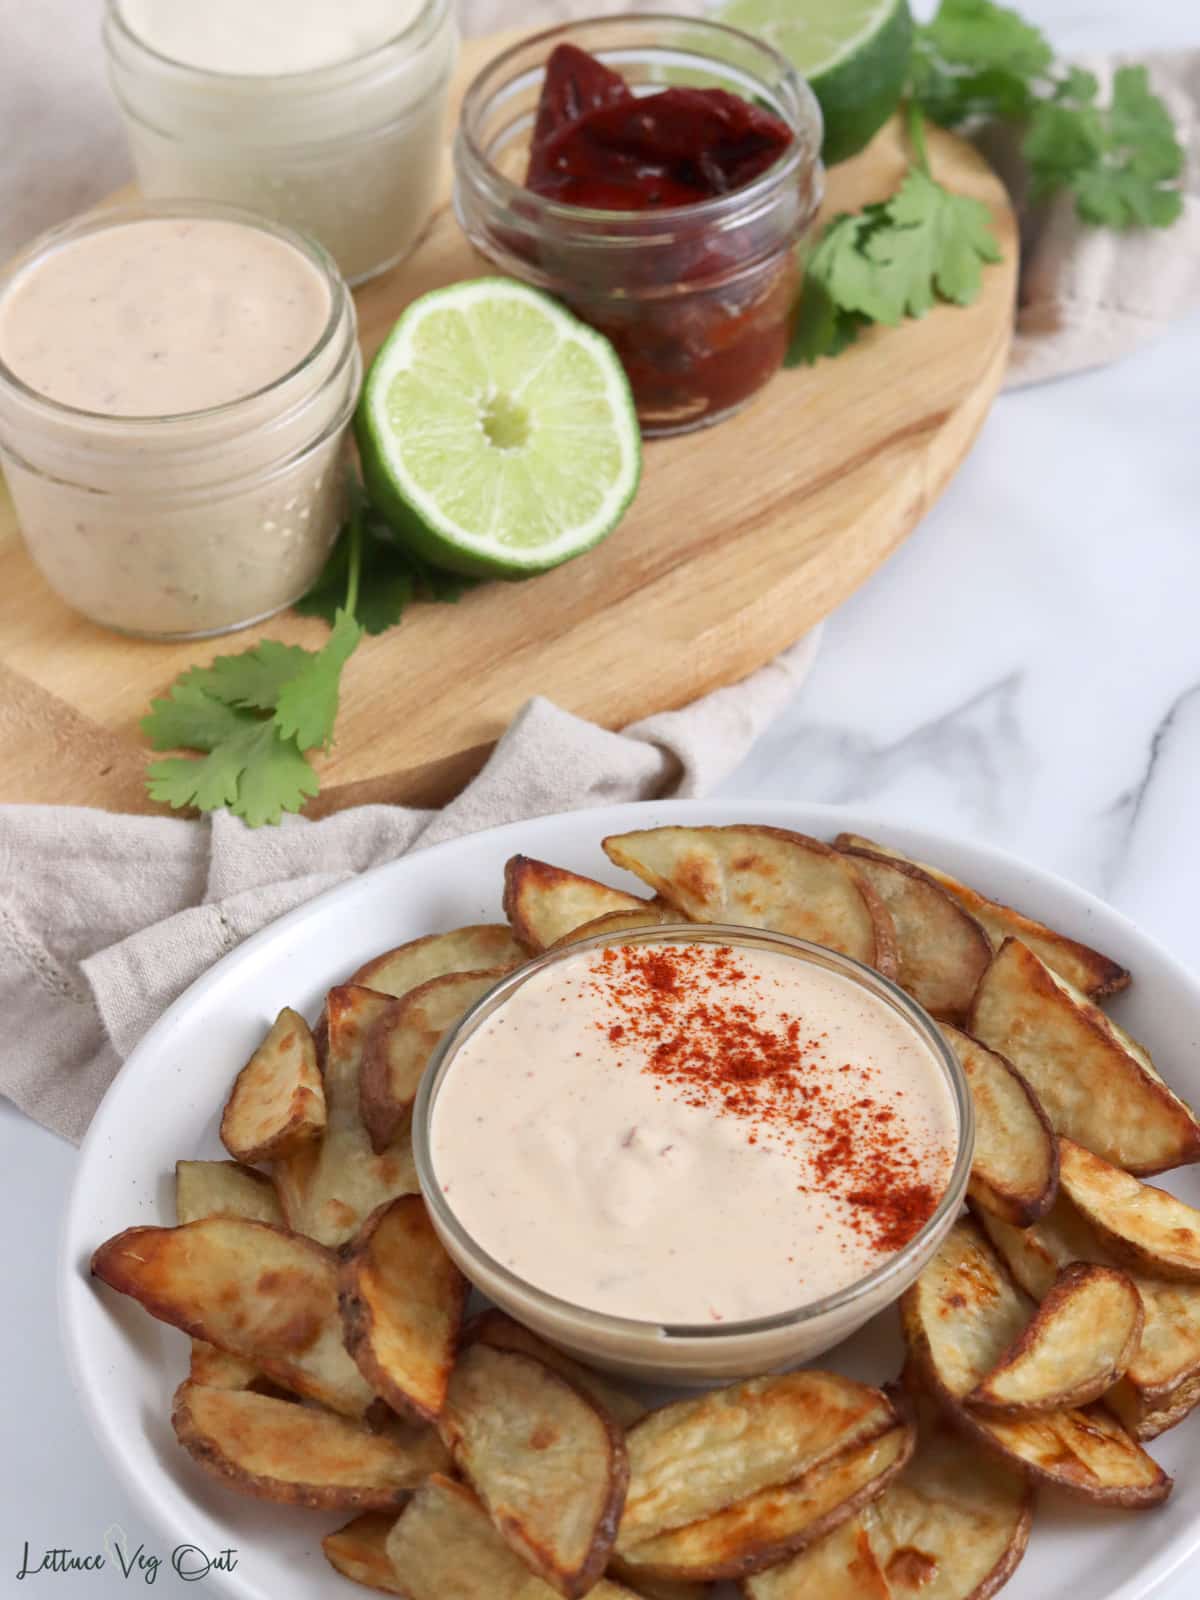 Plate of potato wedges with chipotle mayo sauce in front of wood board with chipotle peppers, more chipotle mayo, lime slices and cilantro.